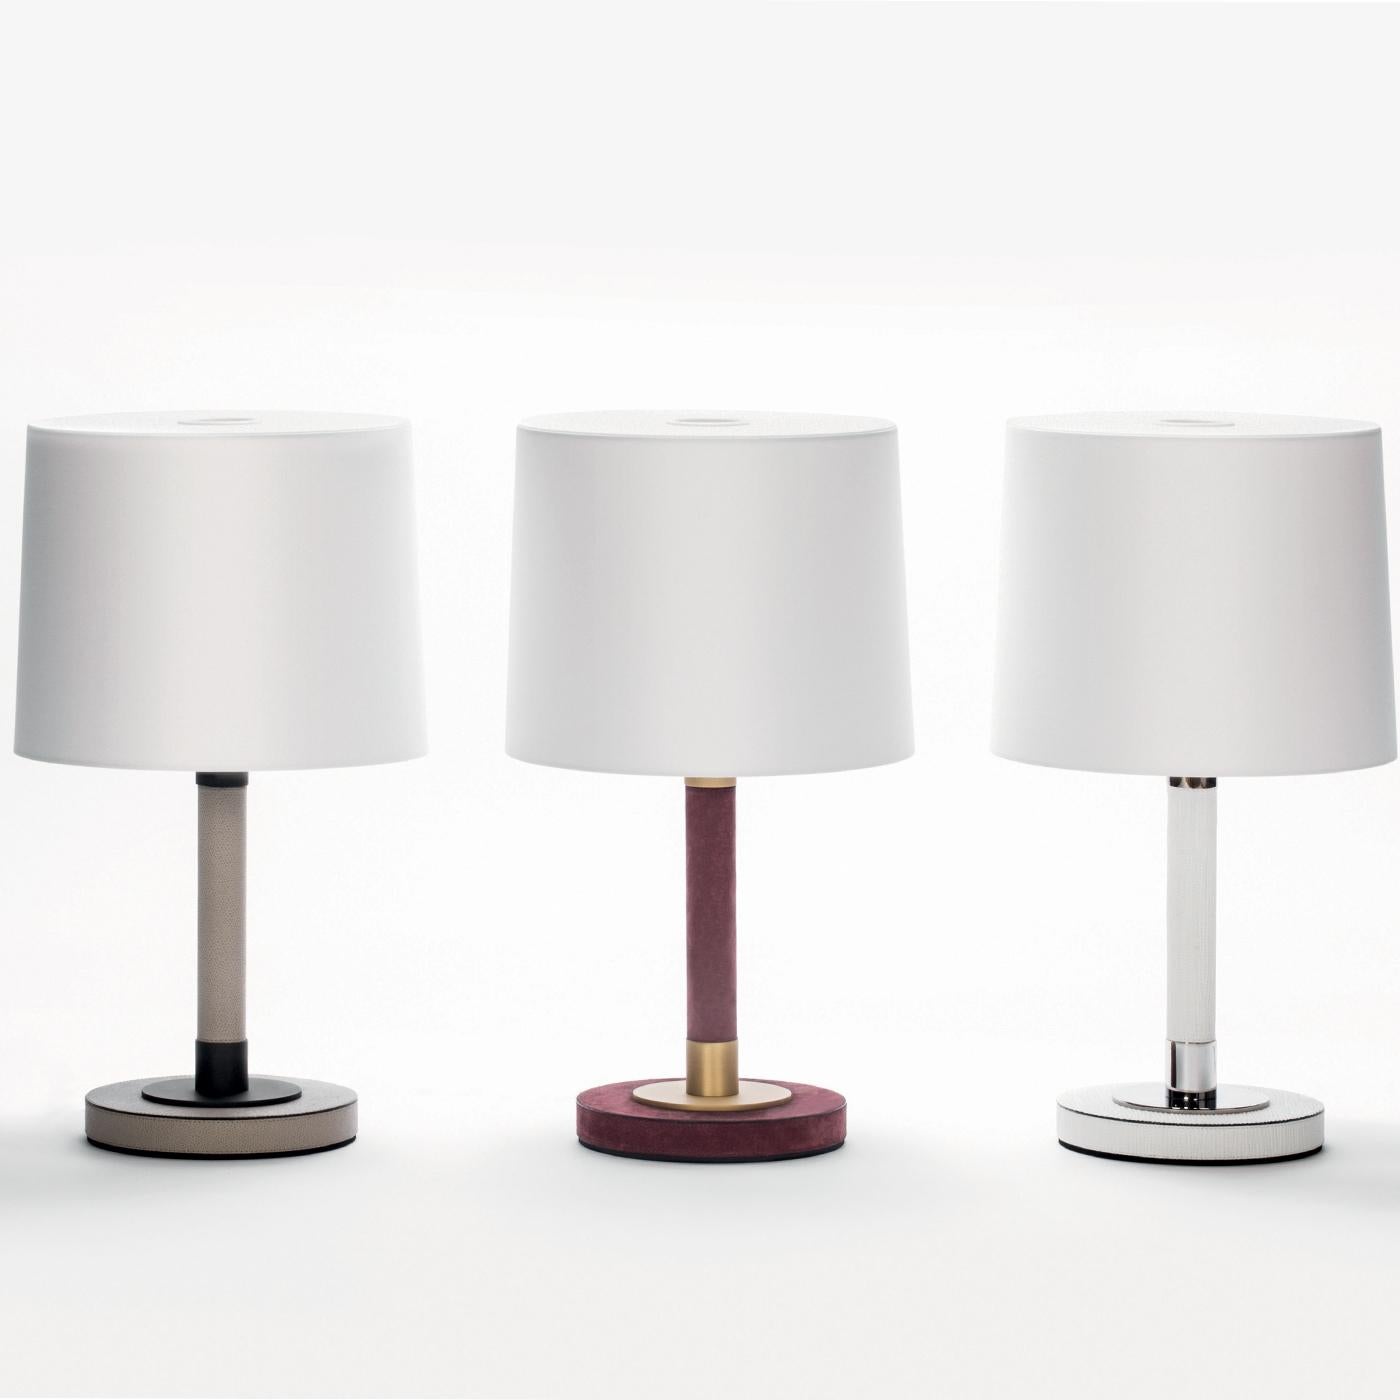 Great for lighting by a bedside or in a lounge, this contemporary design lamp has a white leather-covered wood base with polished chrome details (also bronze and brass on request) complemented by a crisp white cotton shade. Additional features